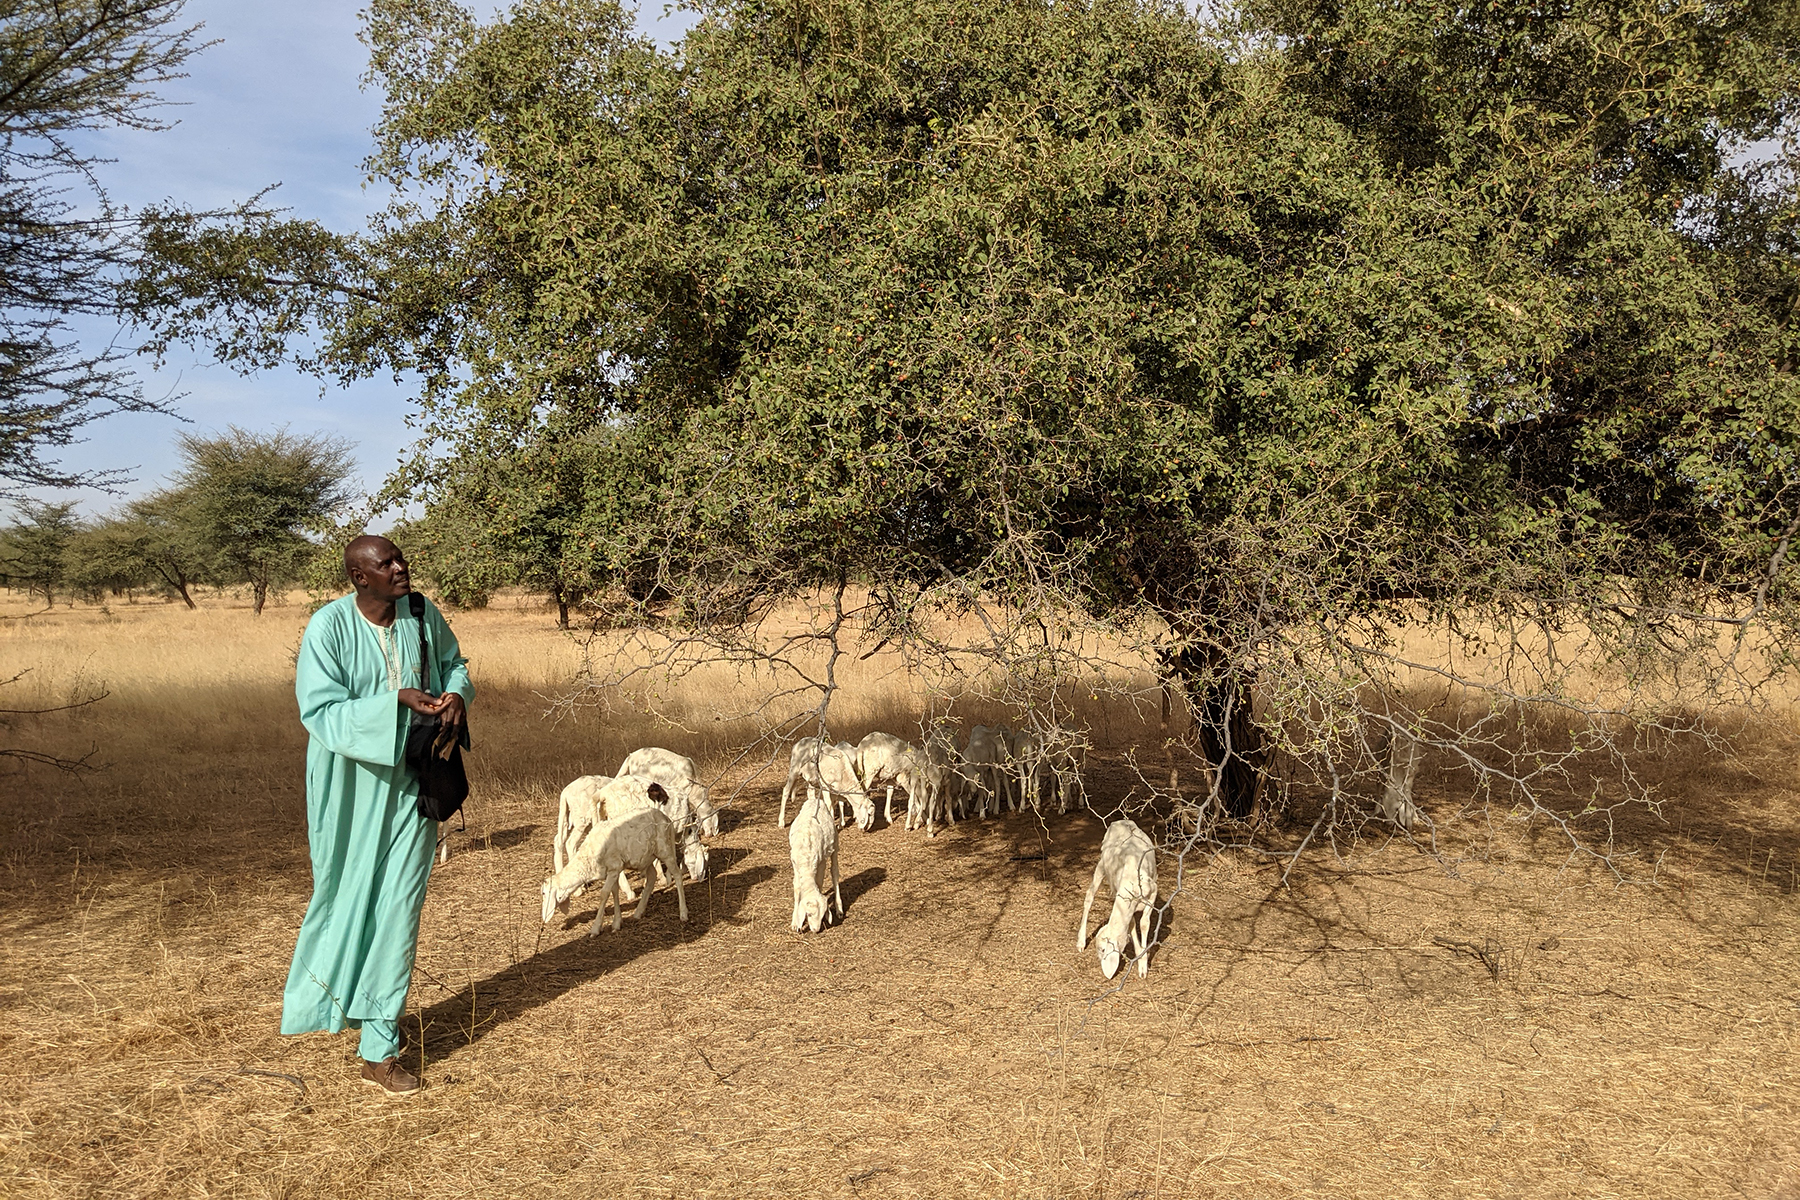 In the past the people moved with their livestock from one grazing ground to another in a seasonal cycle. However, more and more people settle down more permanently around boreholes, increasing pressure on the natural resources.